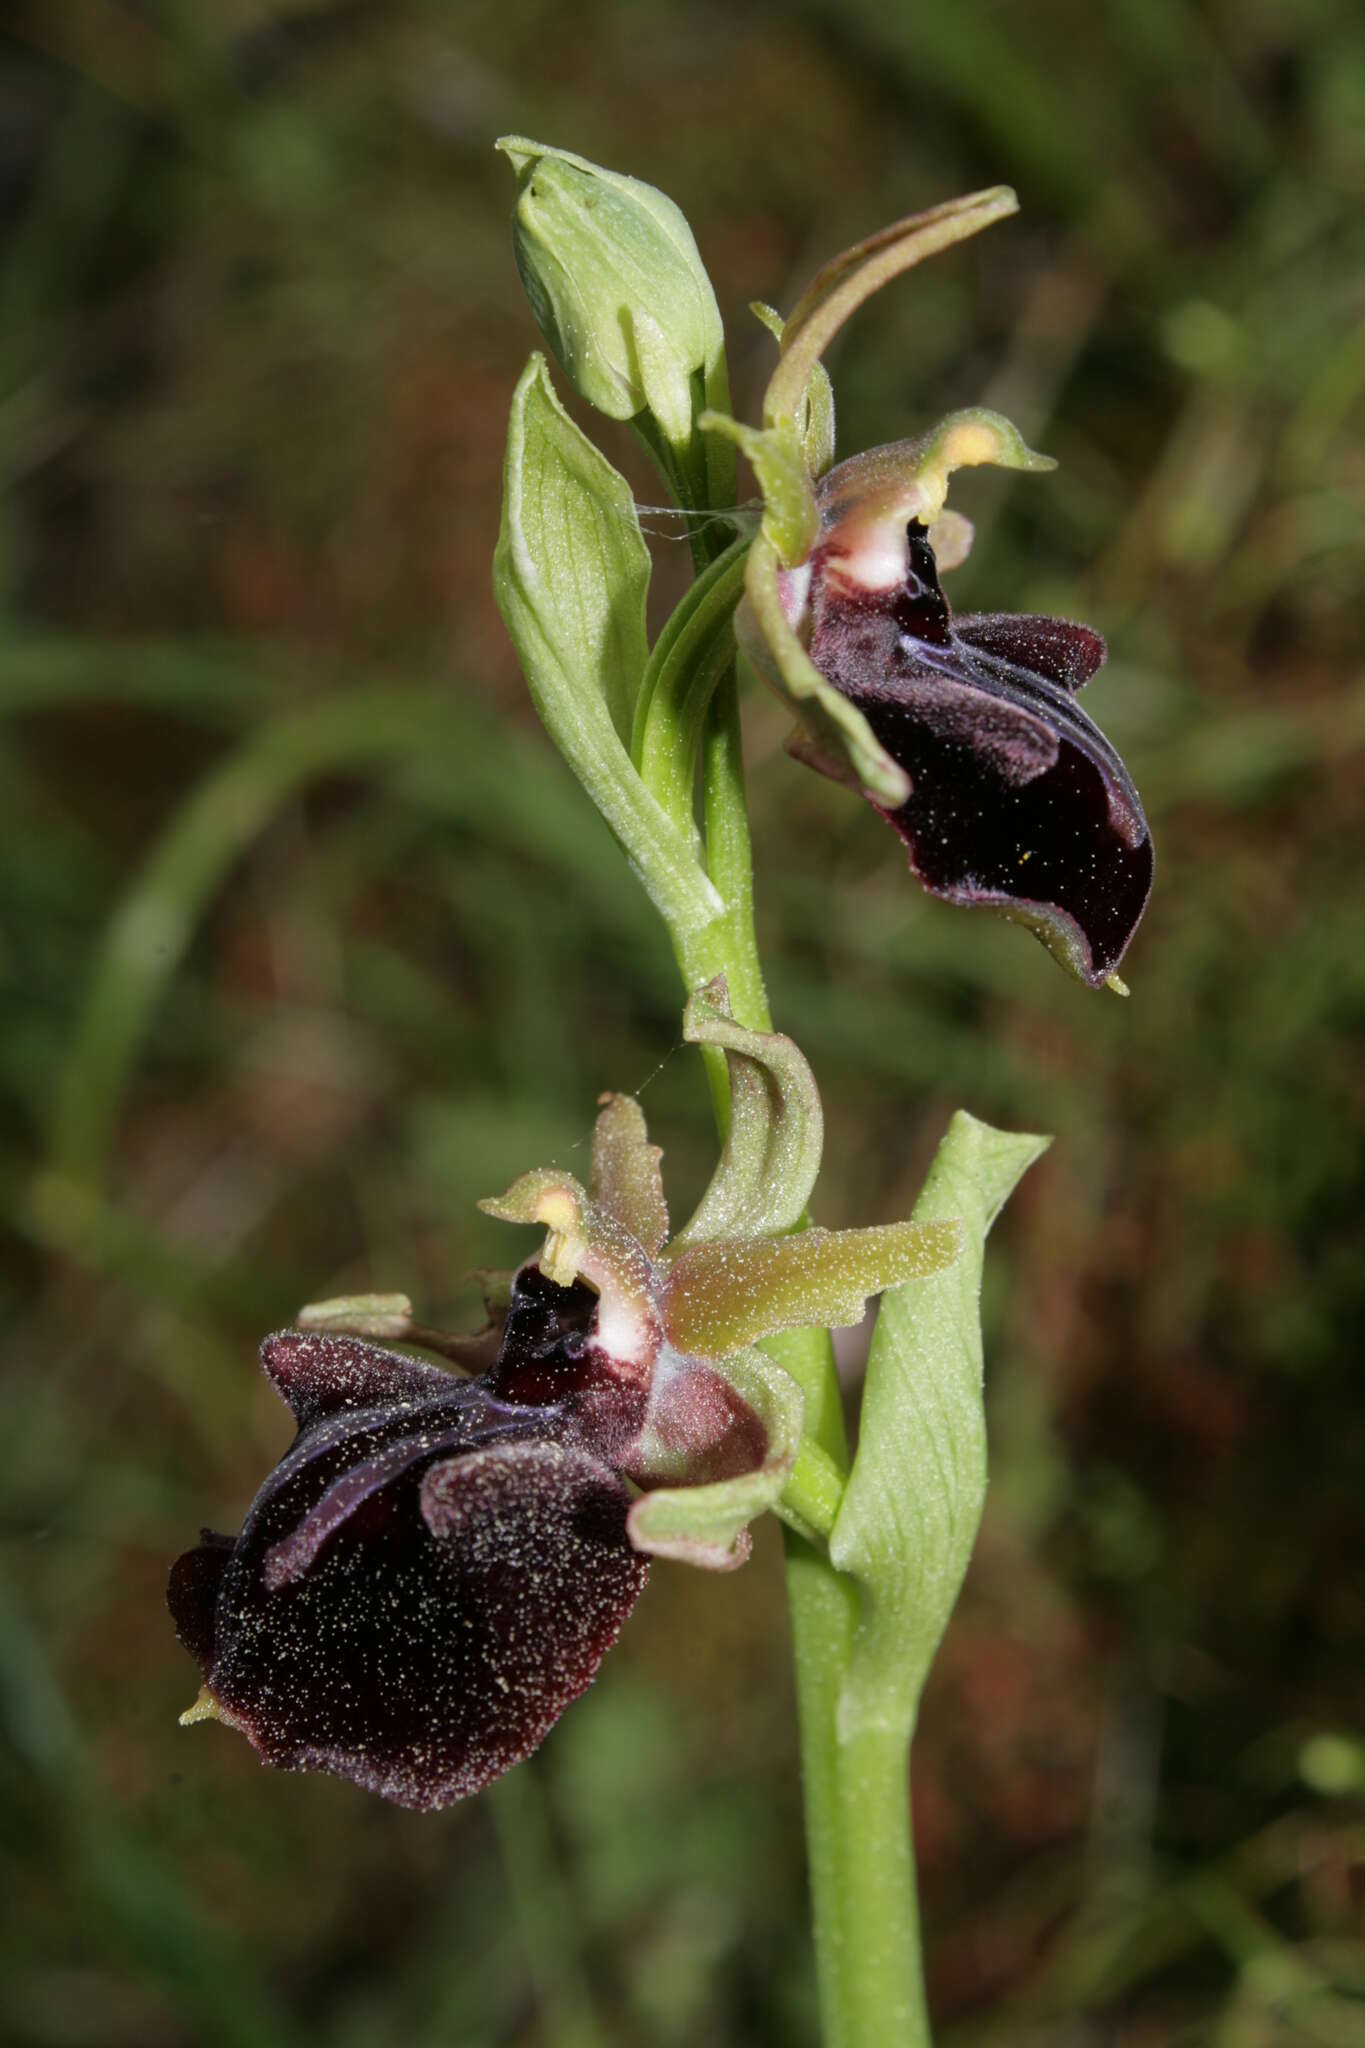 Image of Ophrys sphegodes subsp. mammosa (Desf.) Soó ex E. Nelson